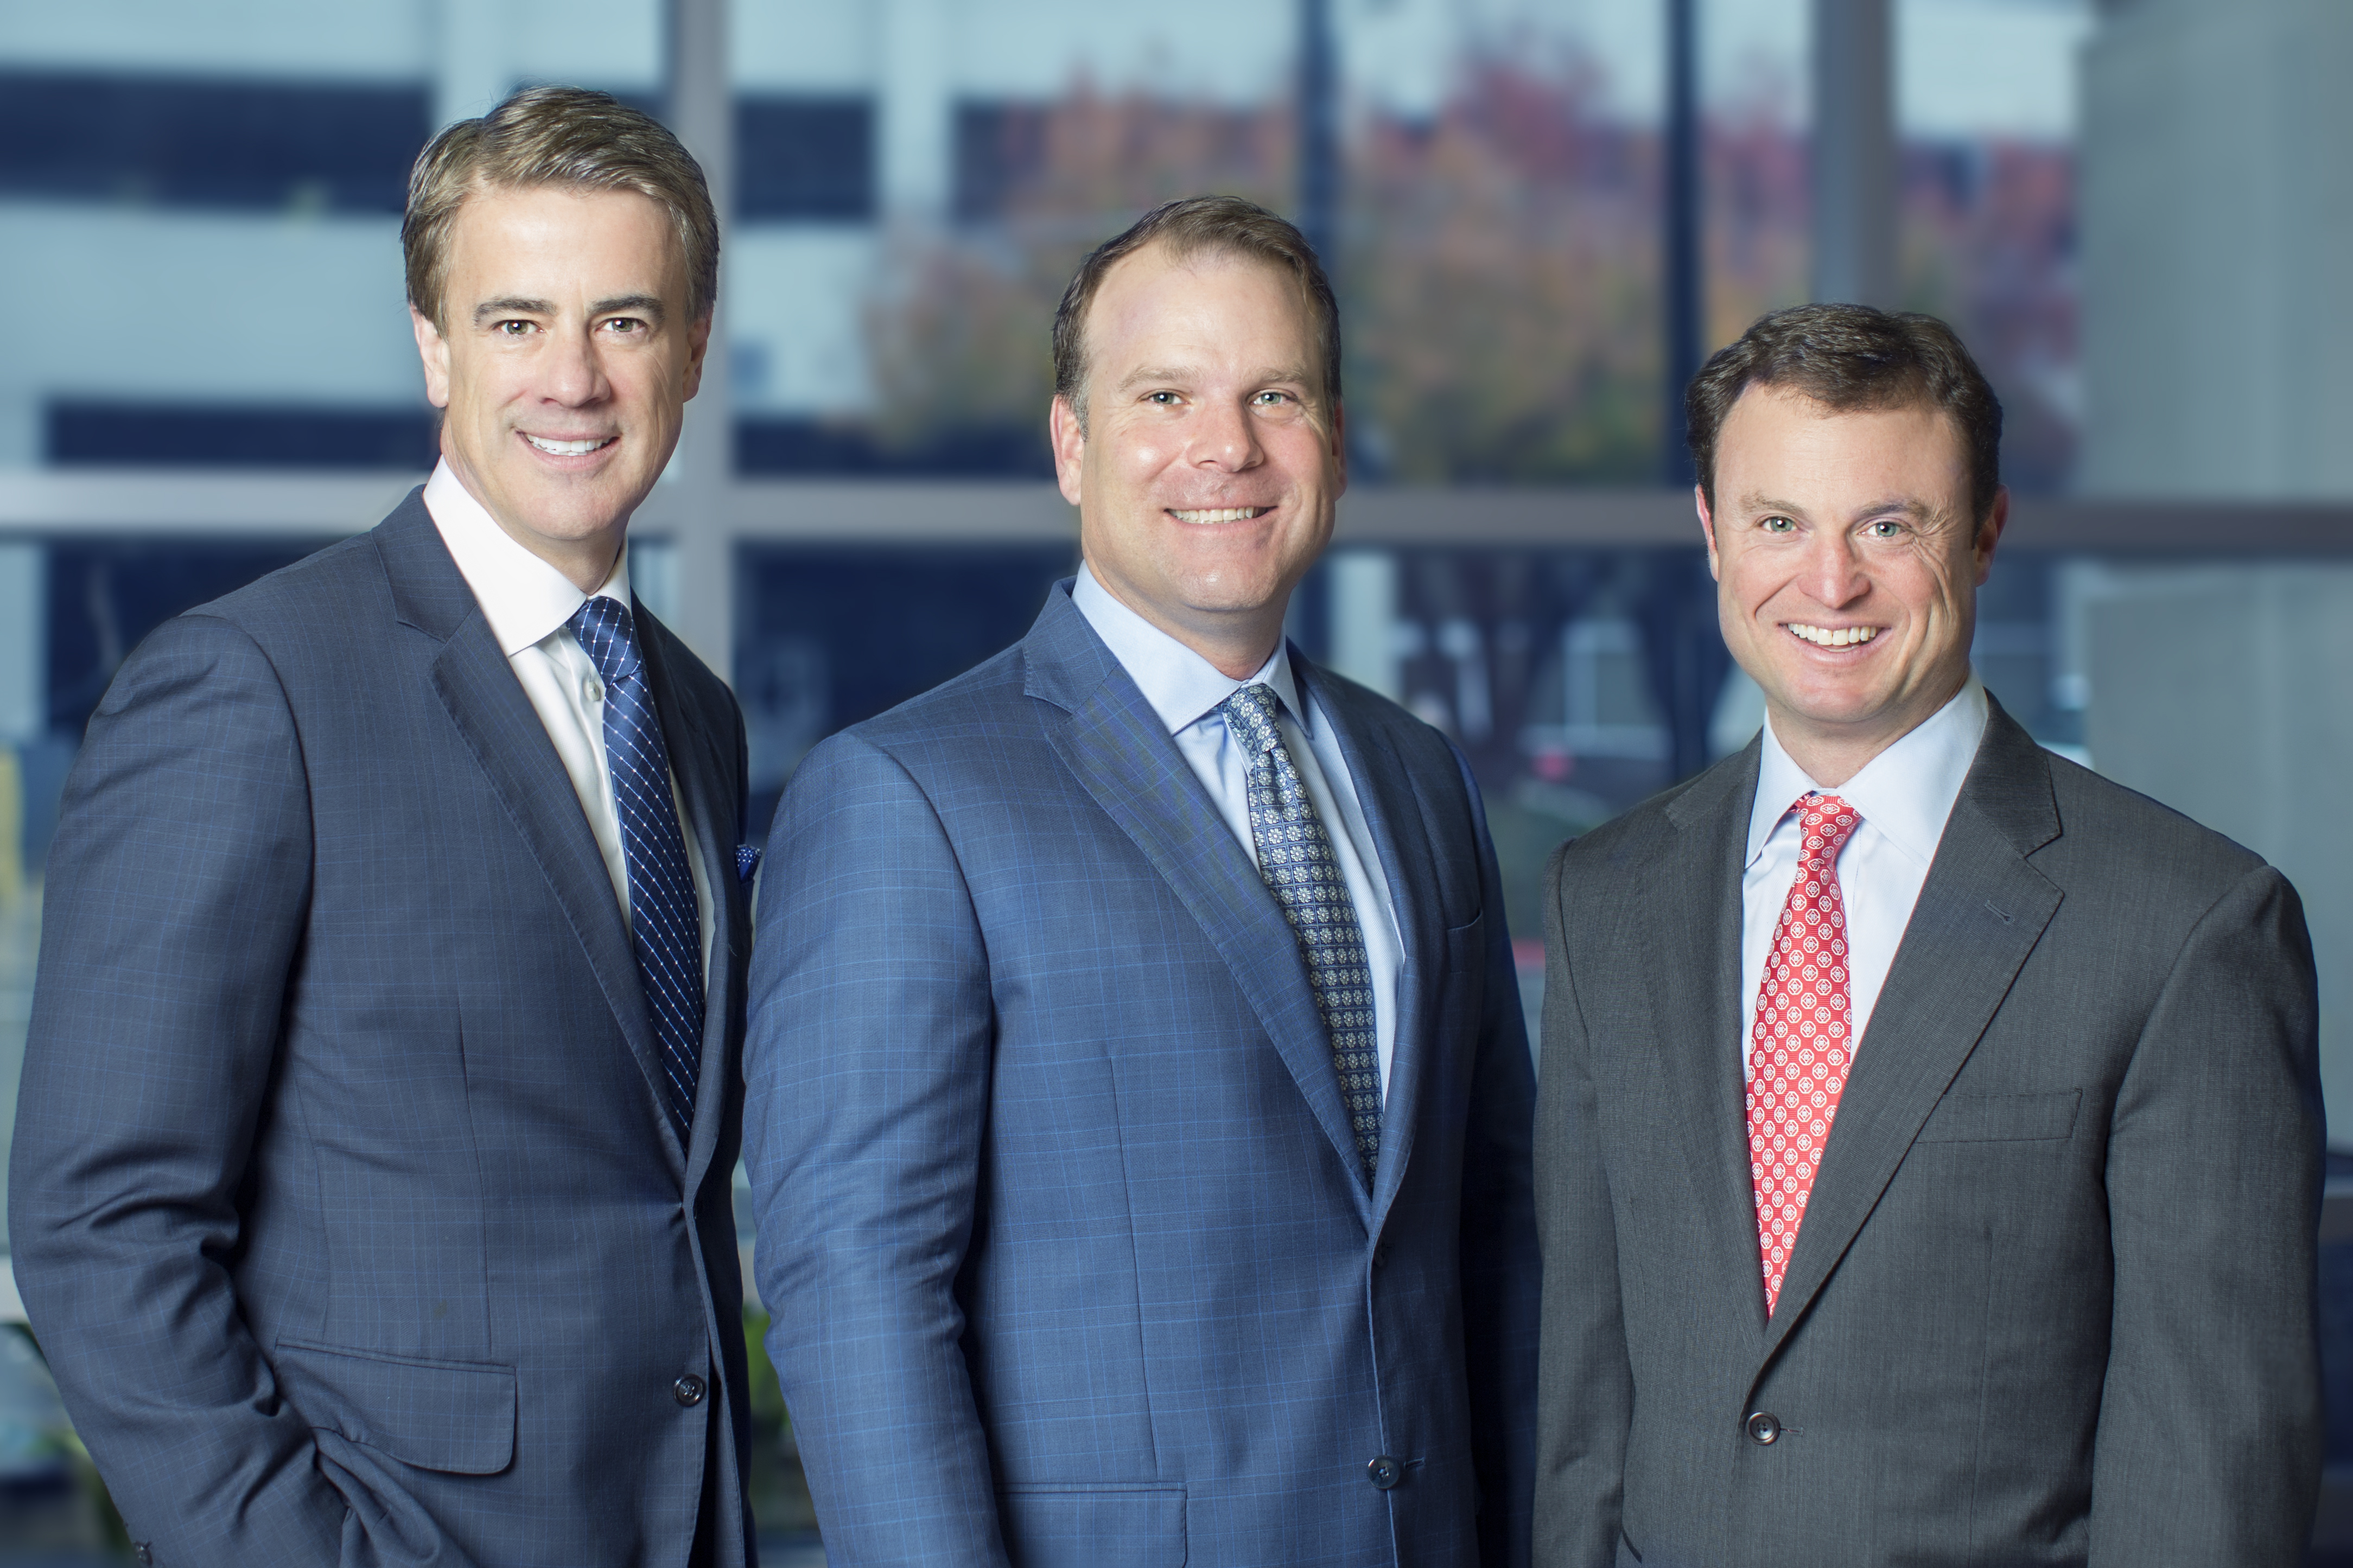 New Staubach Capital investment firm on 